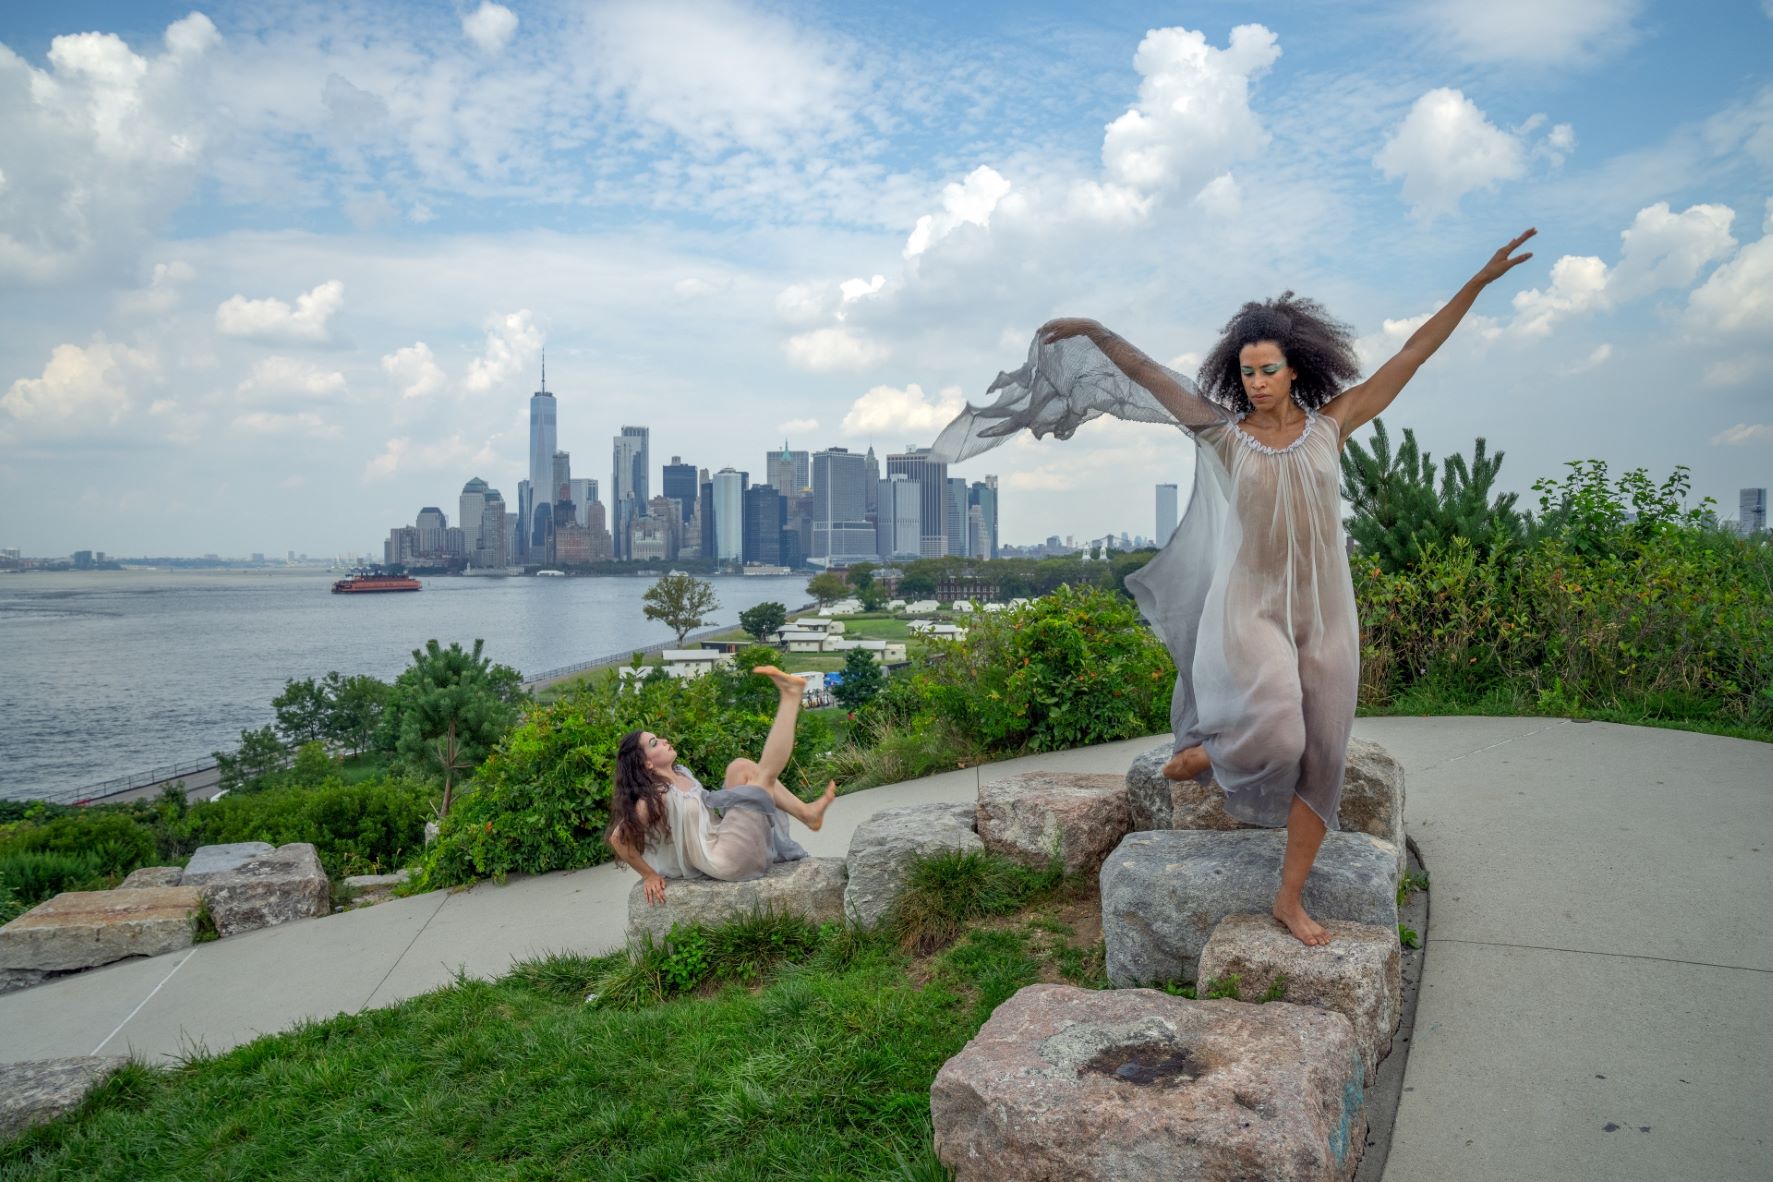 L. TO R. GABRIELLE WILLS & NATASHA DIAMOND WALKER IN 'DEMOLITION ANGELS' AS PART OF 'HERSTORY OF THE UNIVERSE@GOVERNORS ISLAND', CHOREOGRAPHED BY RICHARD MOVE.  PHOTO BY SLOBODAN RANDJELOVIĆ.